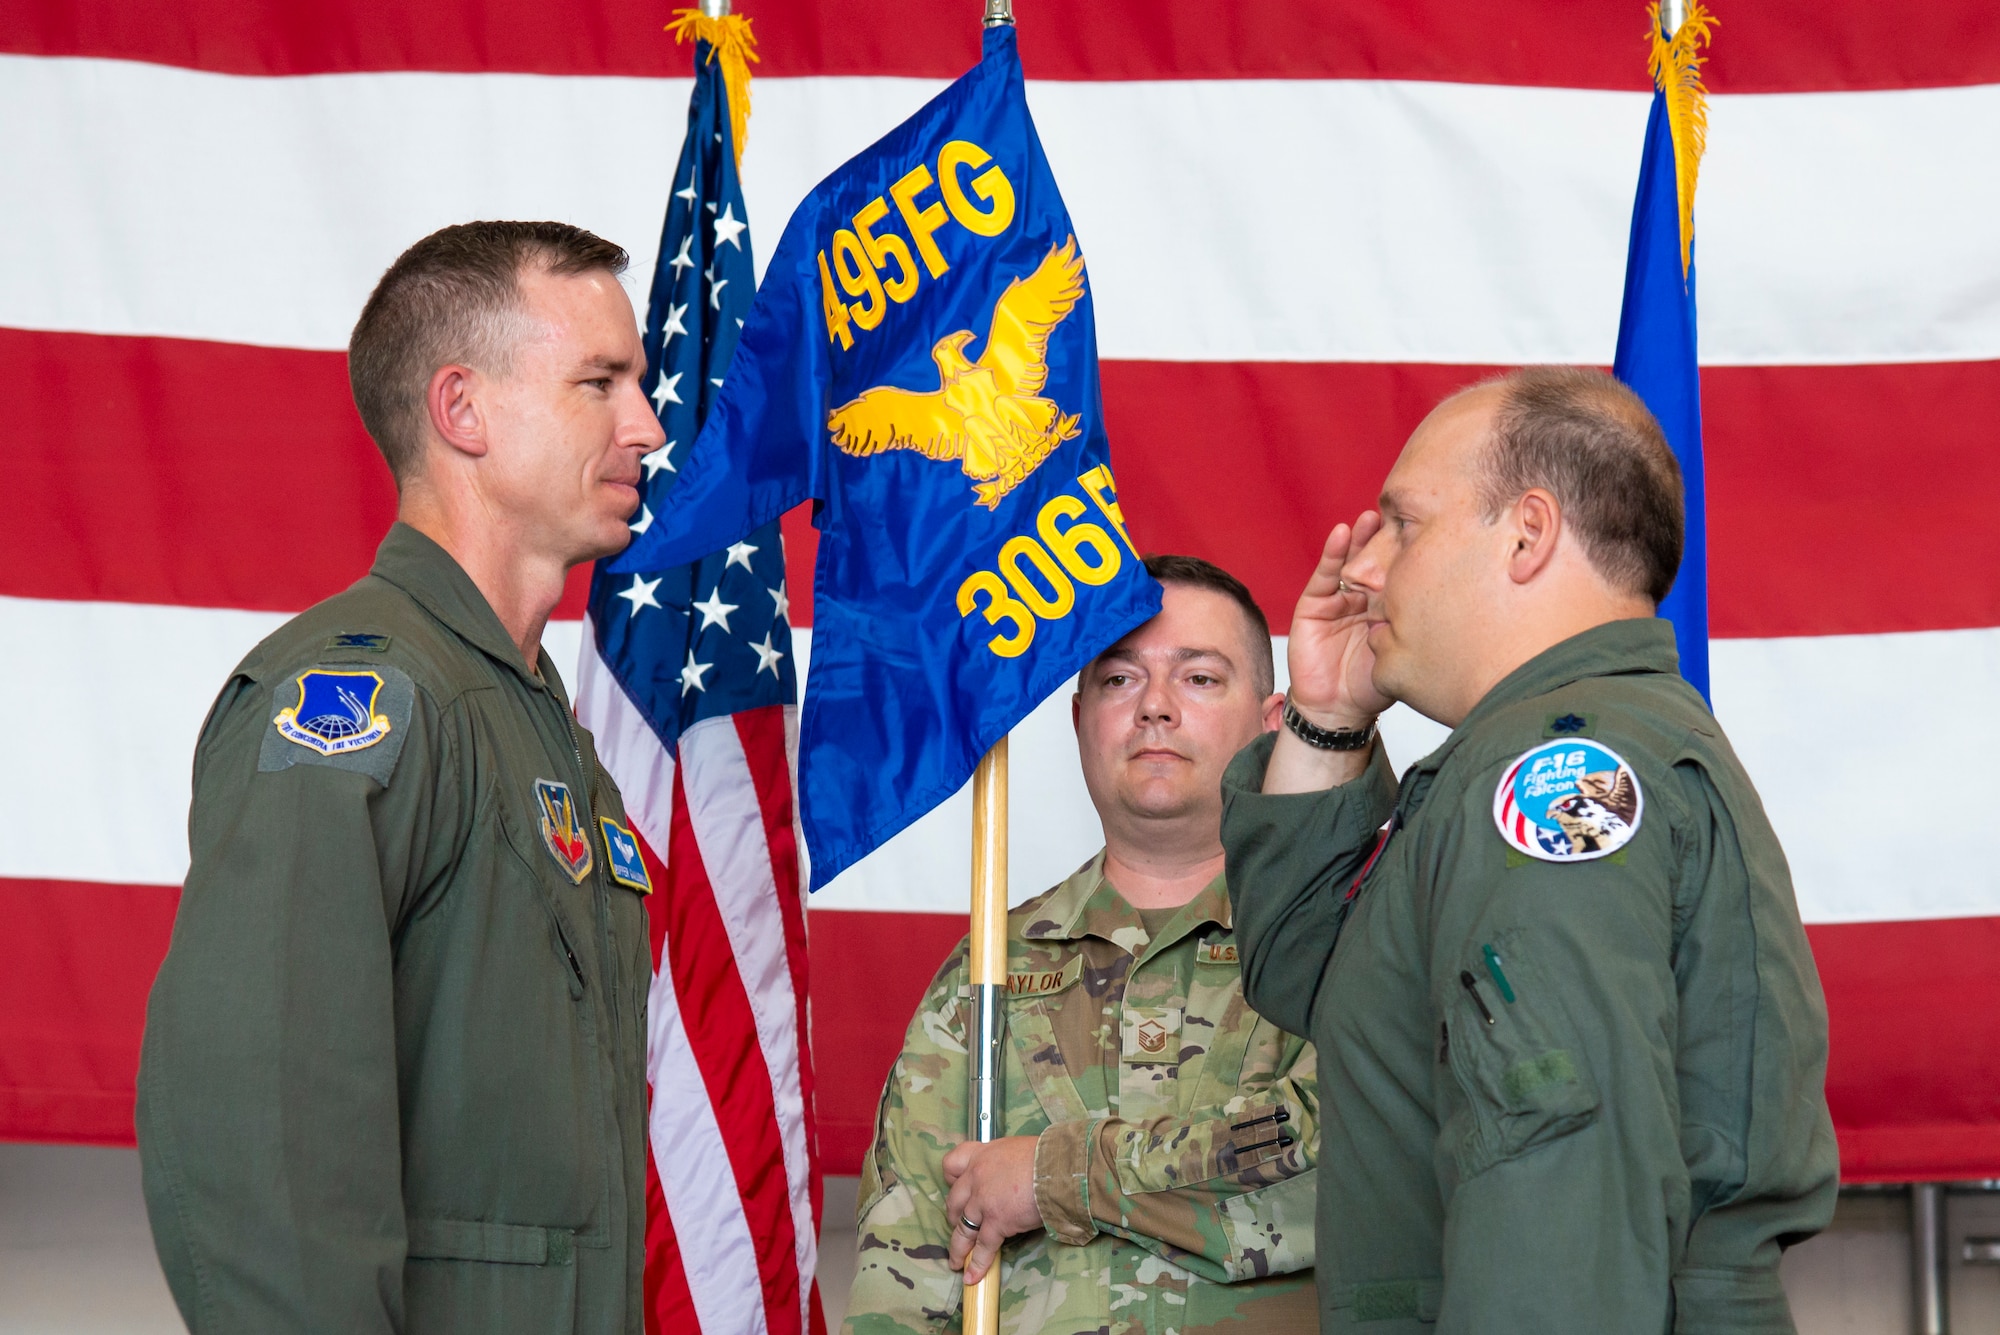 Col. John Galloway receives a salute from Lt. Col. Daniel O'Neal after placing O'Neal in command of the newly activated 306th Fighter Squadron.